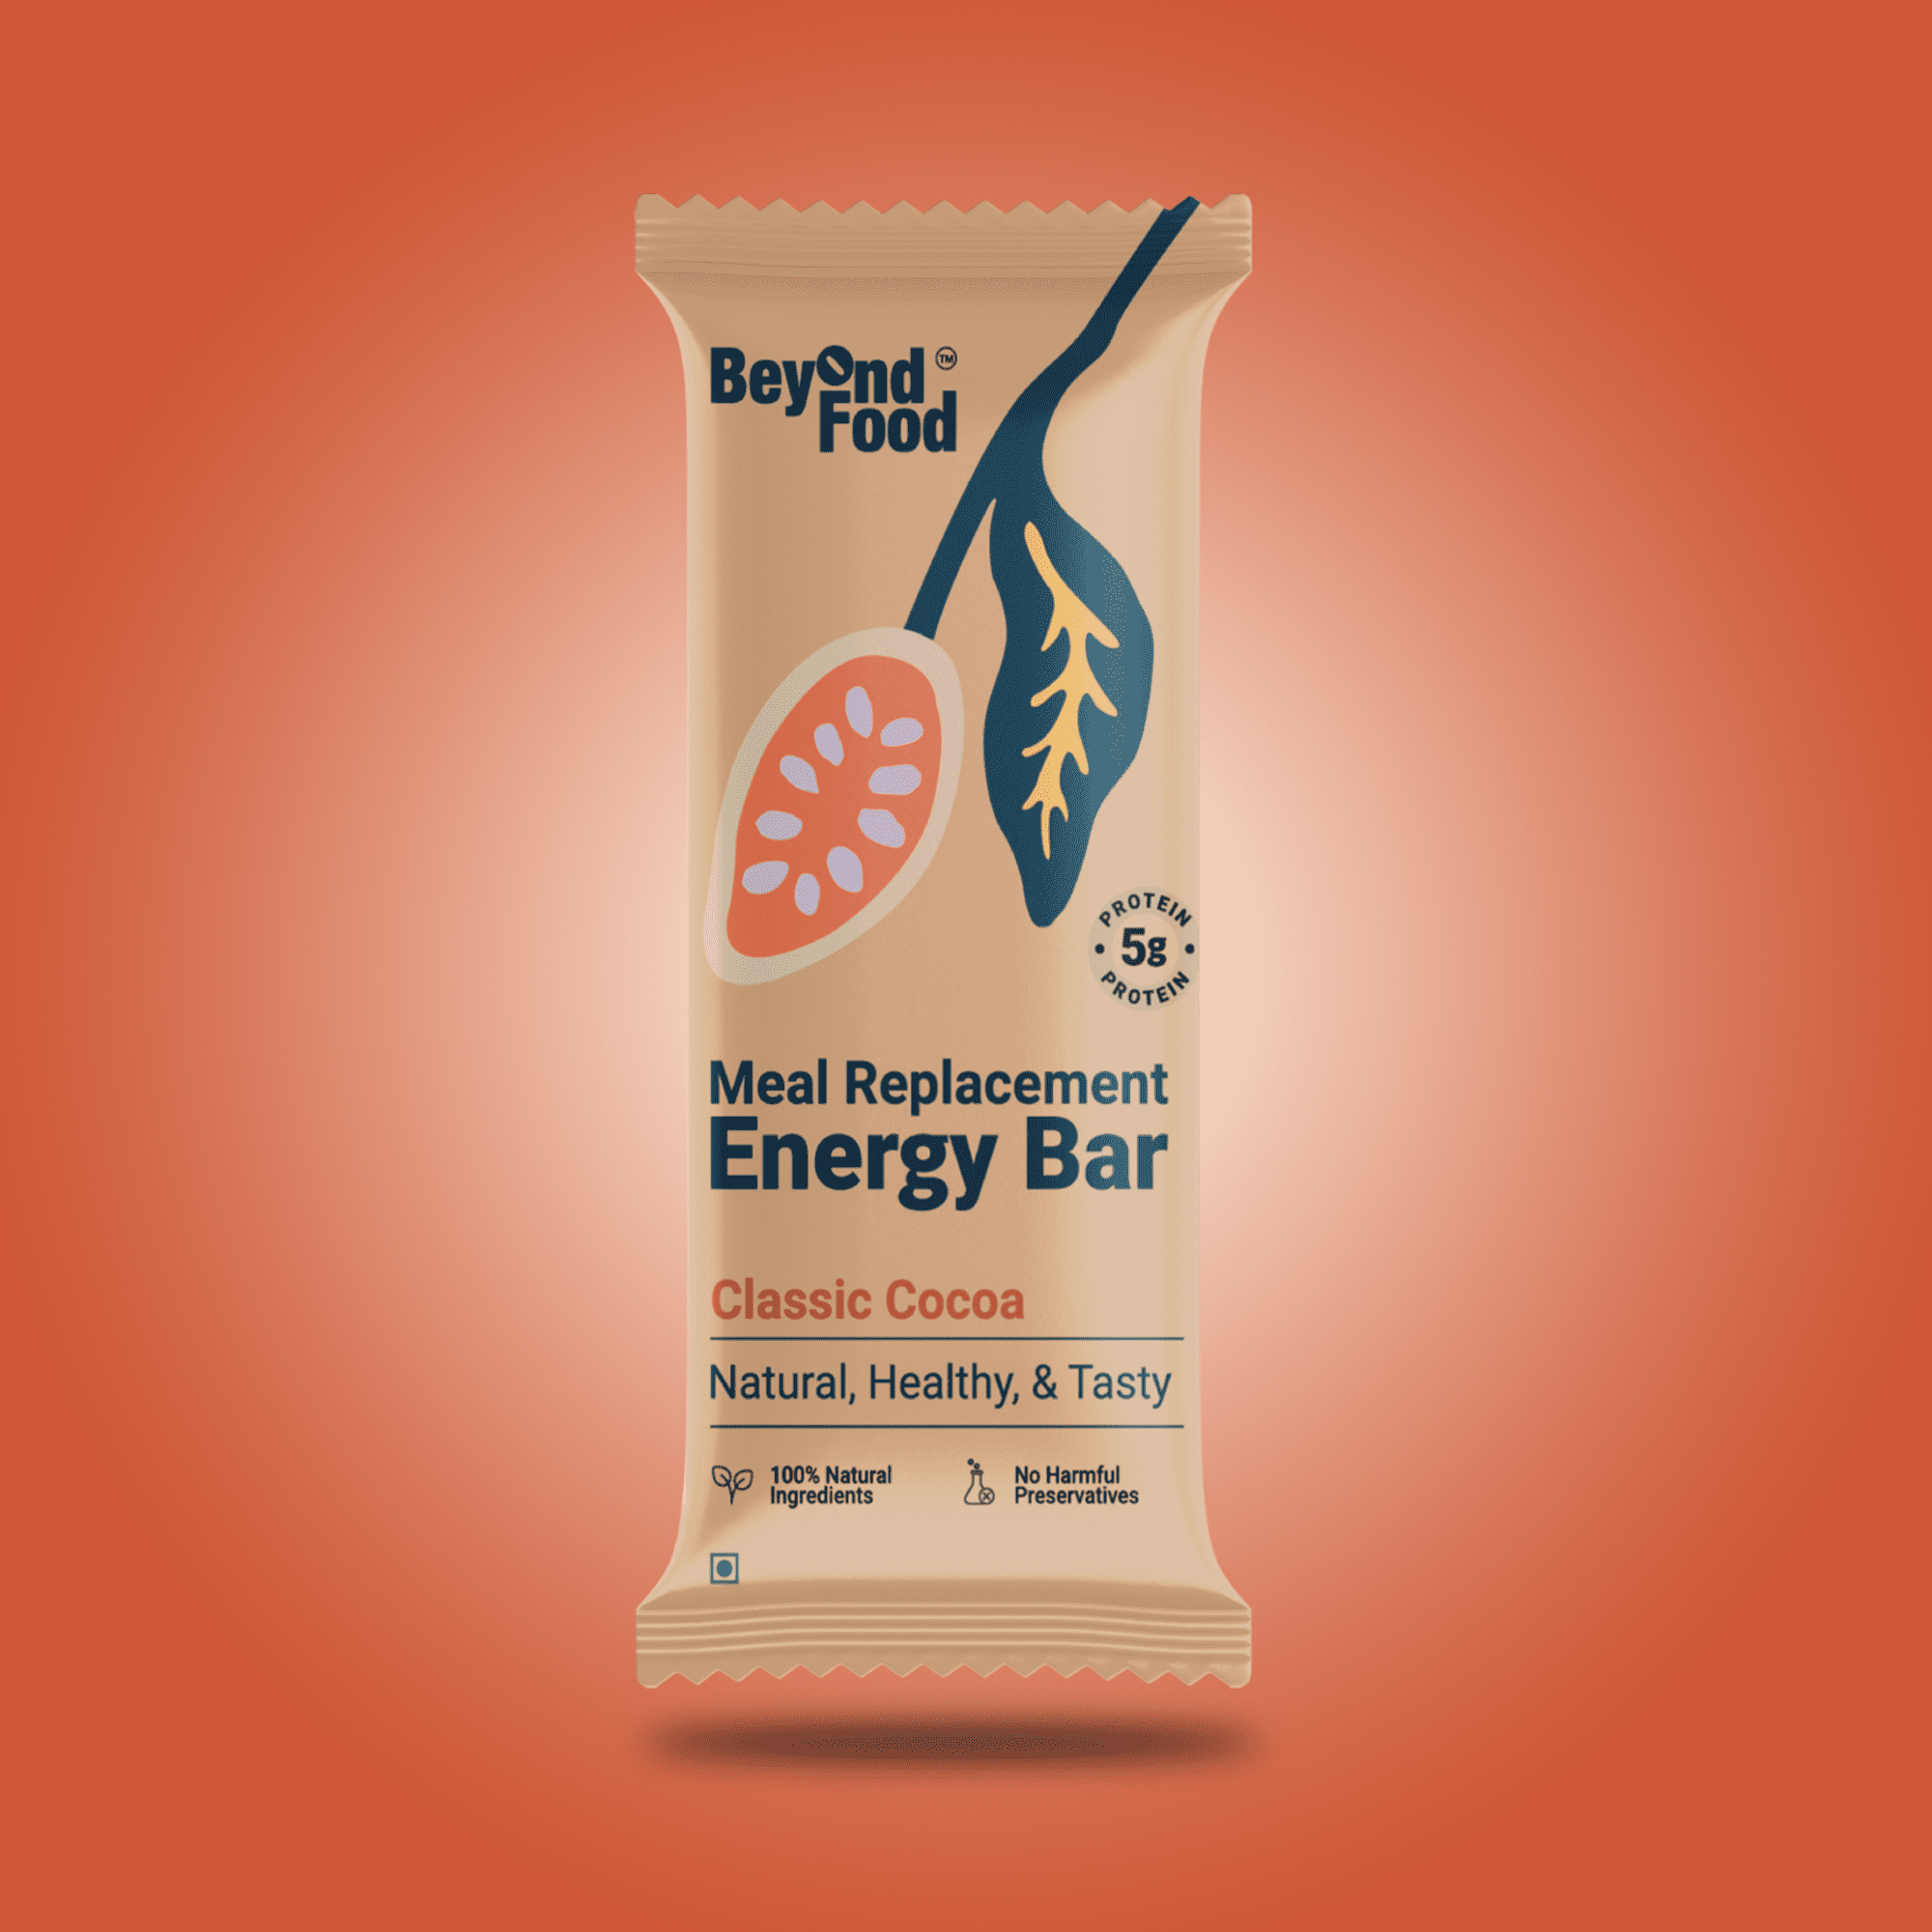 Beyond Food Meal Replacement Energy Bars - Classic Cocoa | Pack of 6 | 6x50g